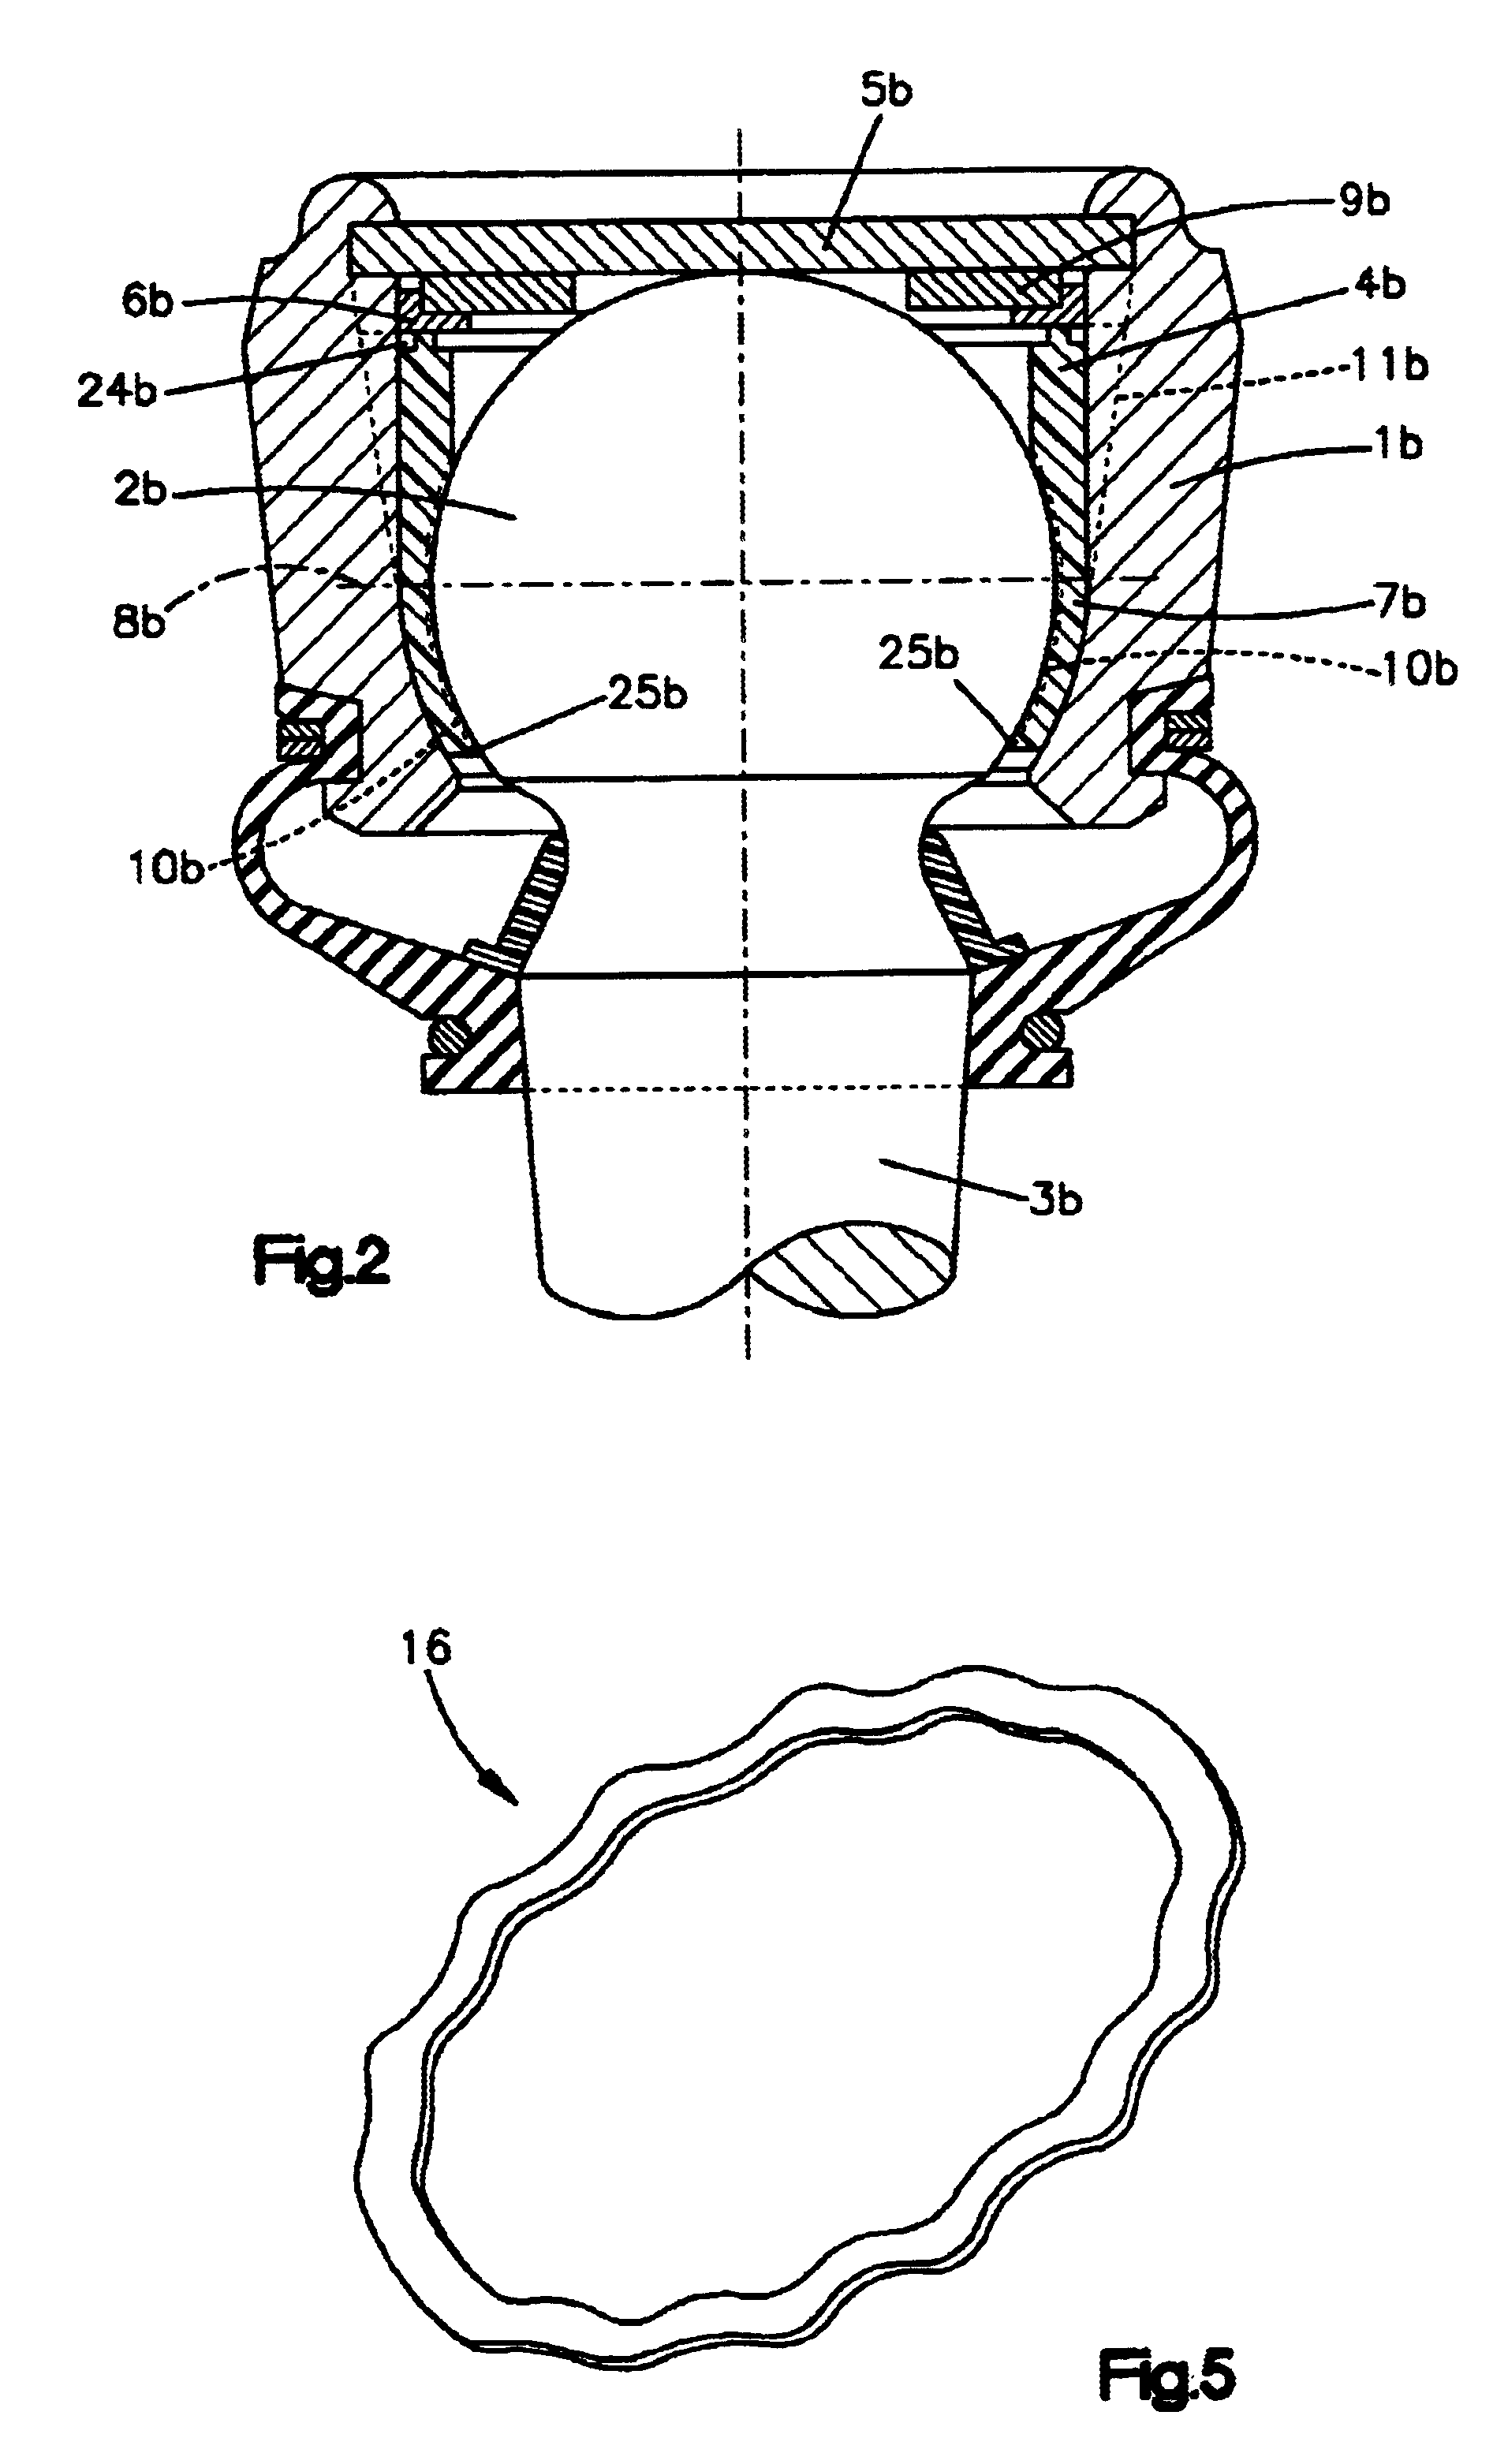 Ball-and-socket joint with bearing shell